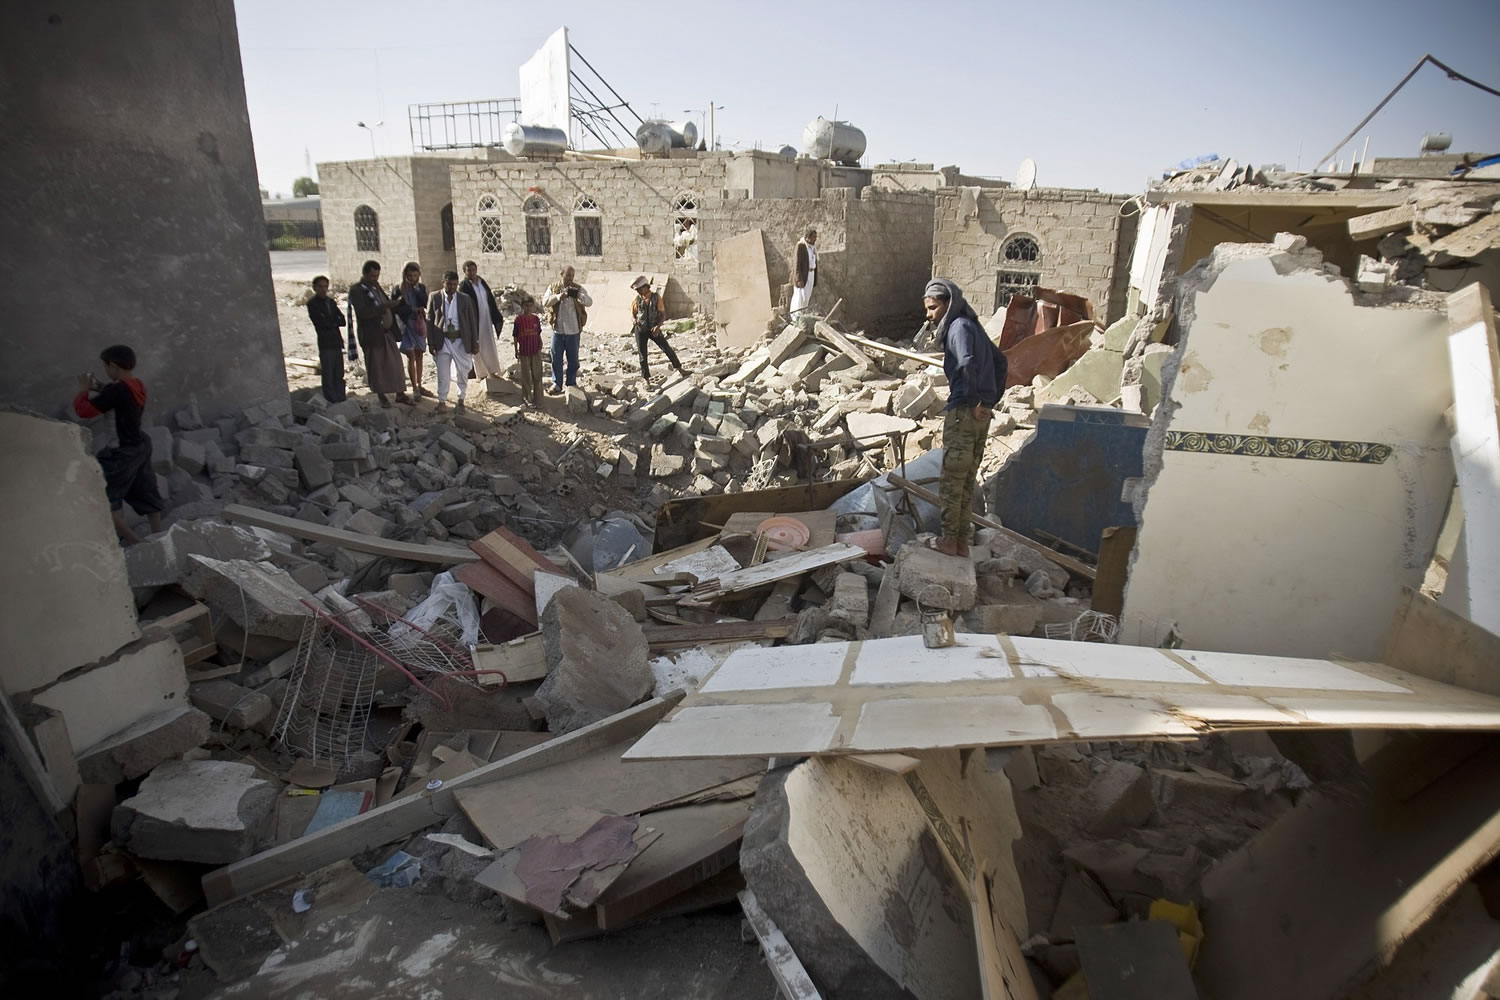 Hadi mohammed/Associated Press
People gather Tuesday near the rubble of houses destroyed by Saudi airstrikes near the airport in Sanaa, Yemen.